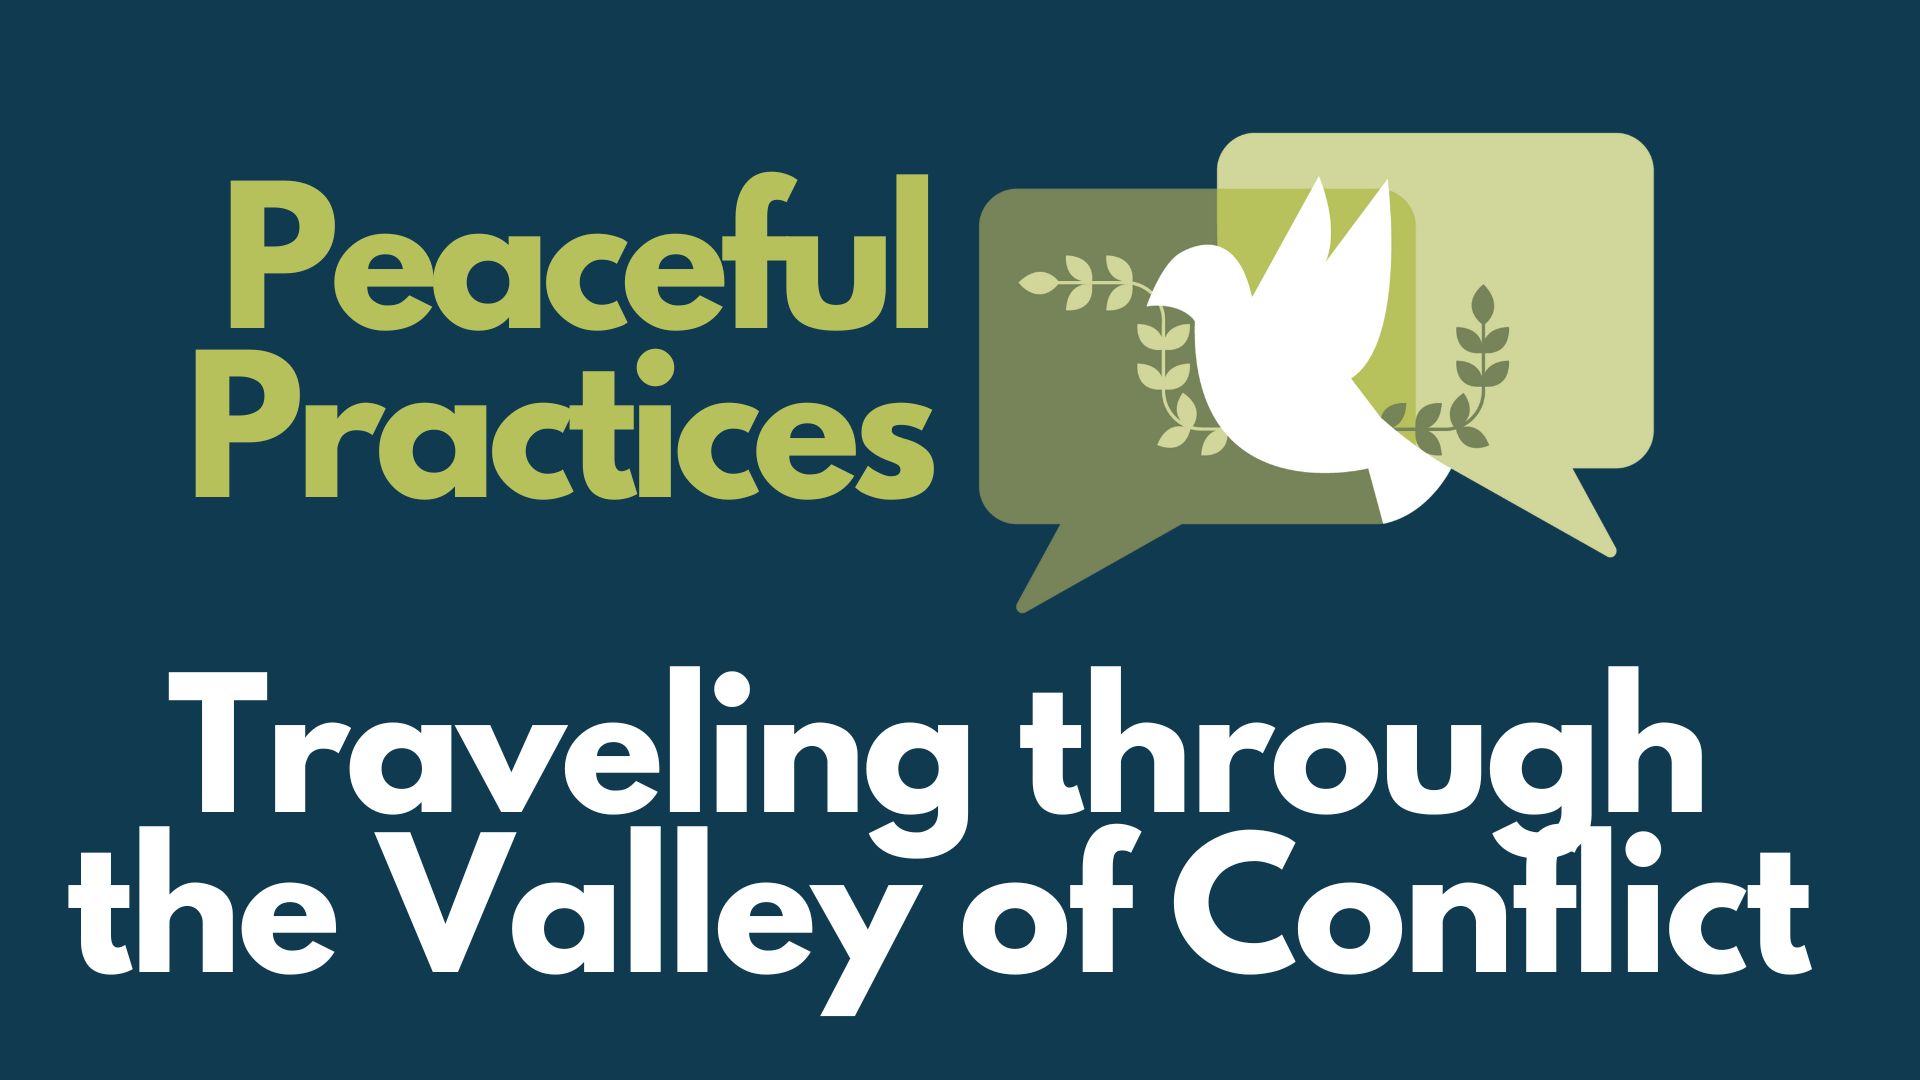 Traveling through the Valley of Conflict